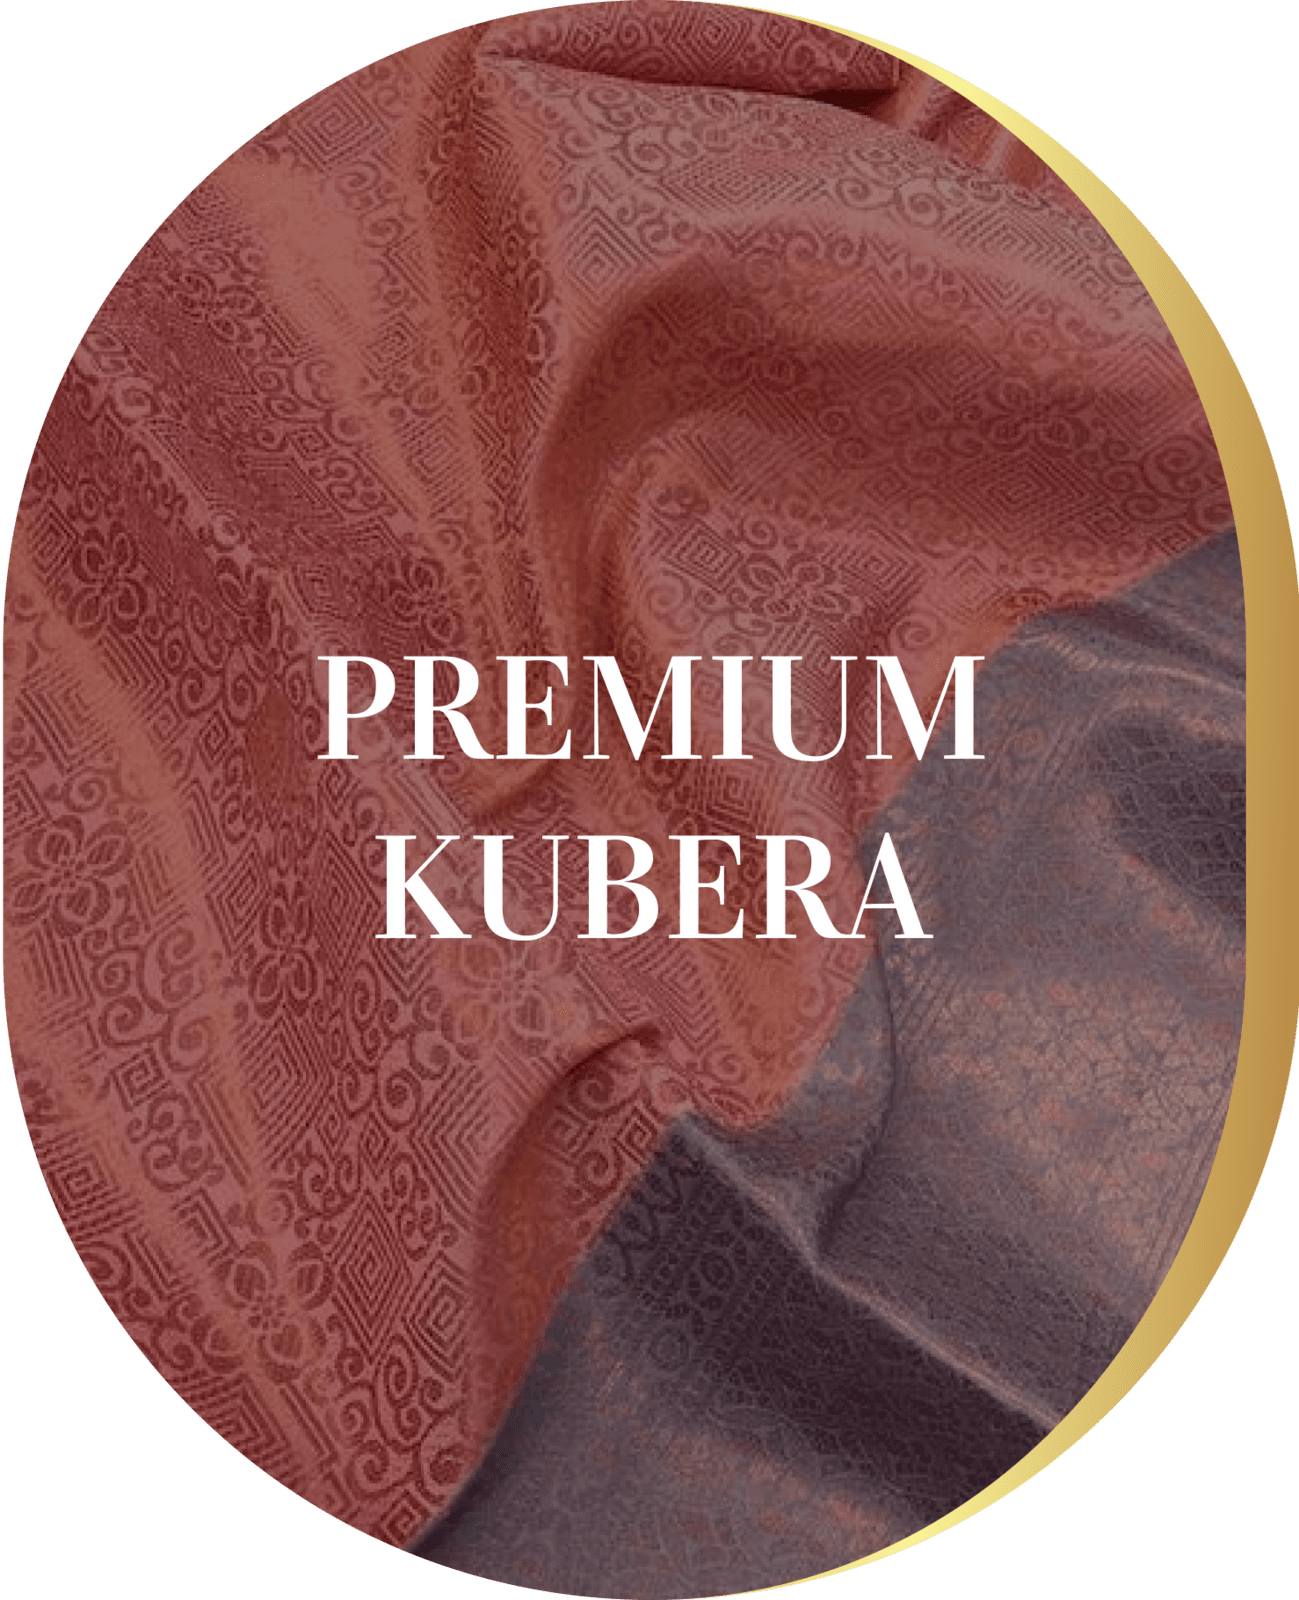 Experience the premium kubera featuring Indian silk sarees, showcasing the rich cultural heritage and authentic craftsmanship.